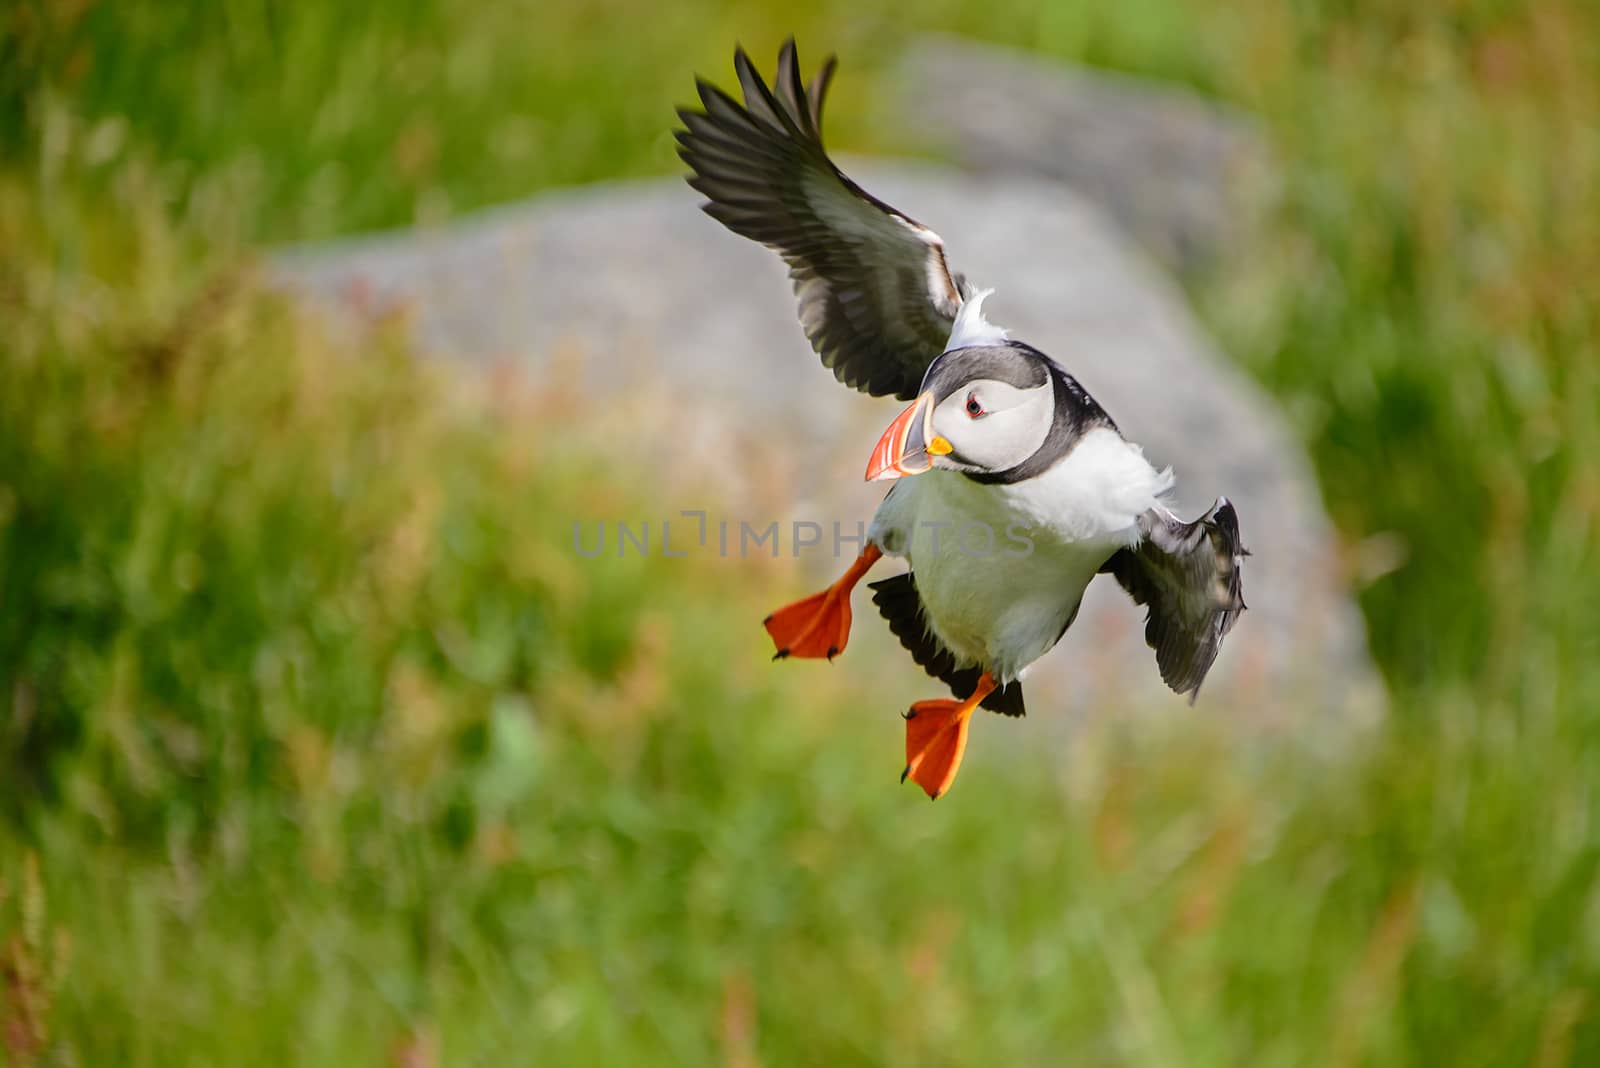 Atlantic puffin by pljvv